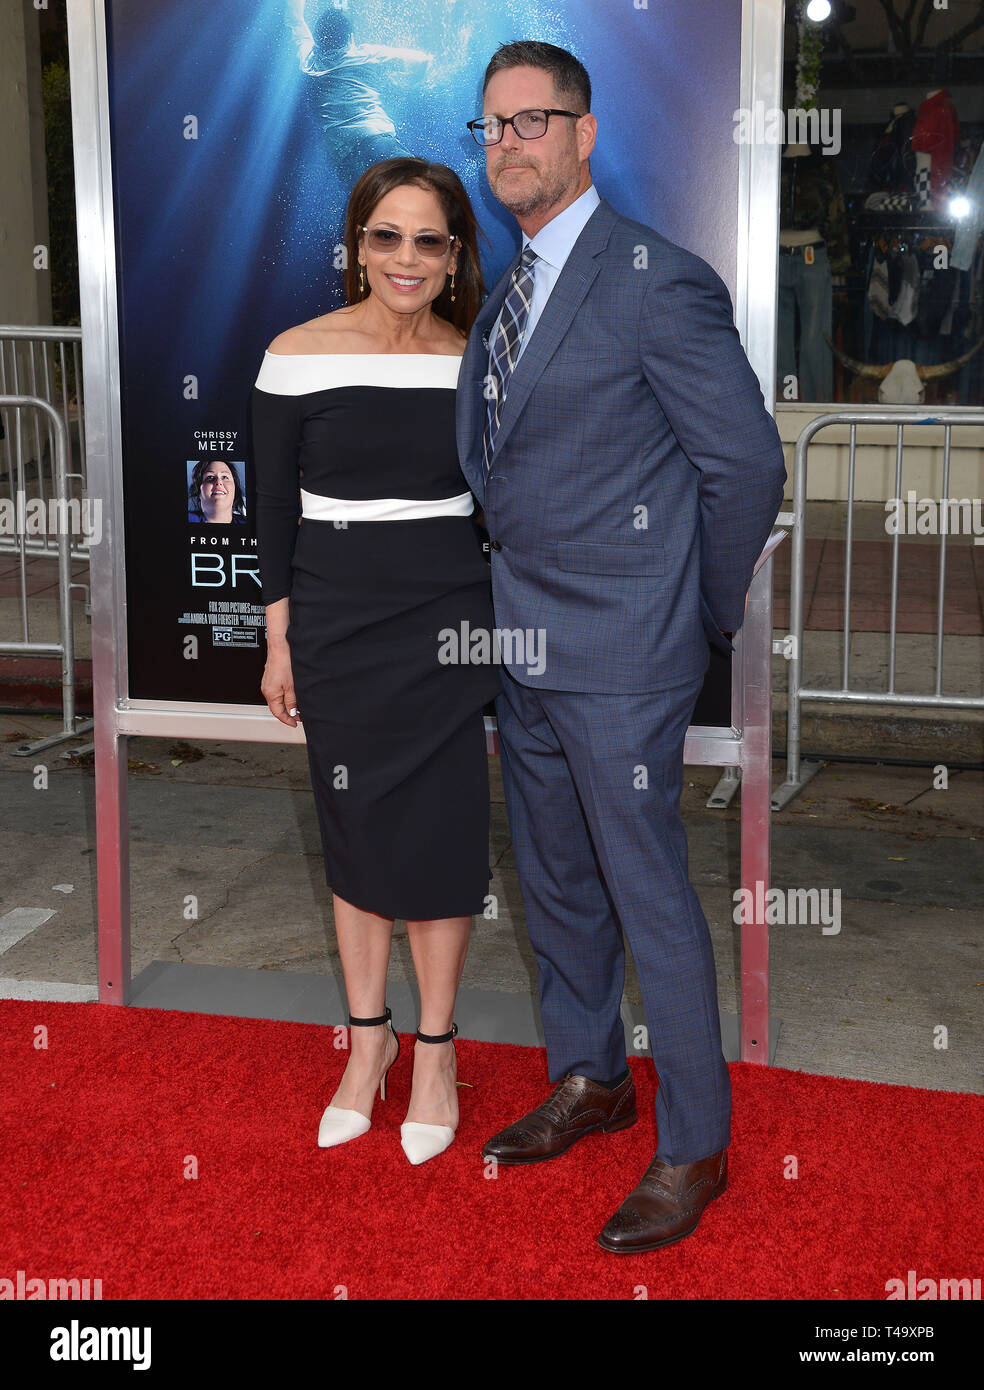 Roxann Dawson - director and husband attend the premiere of 20th Century Fox's 'Breakthrough' at Westwood Regency Theater on April 11, 2019 in Los Angeles, California. Stock Photo